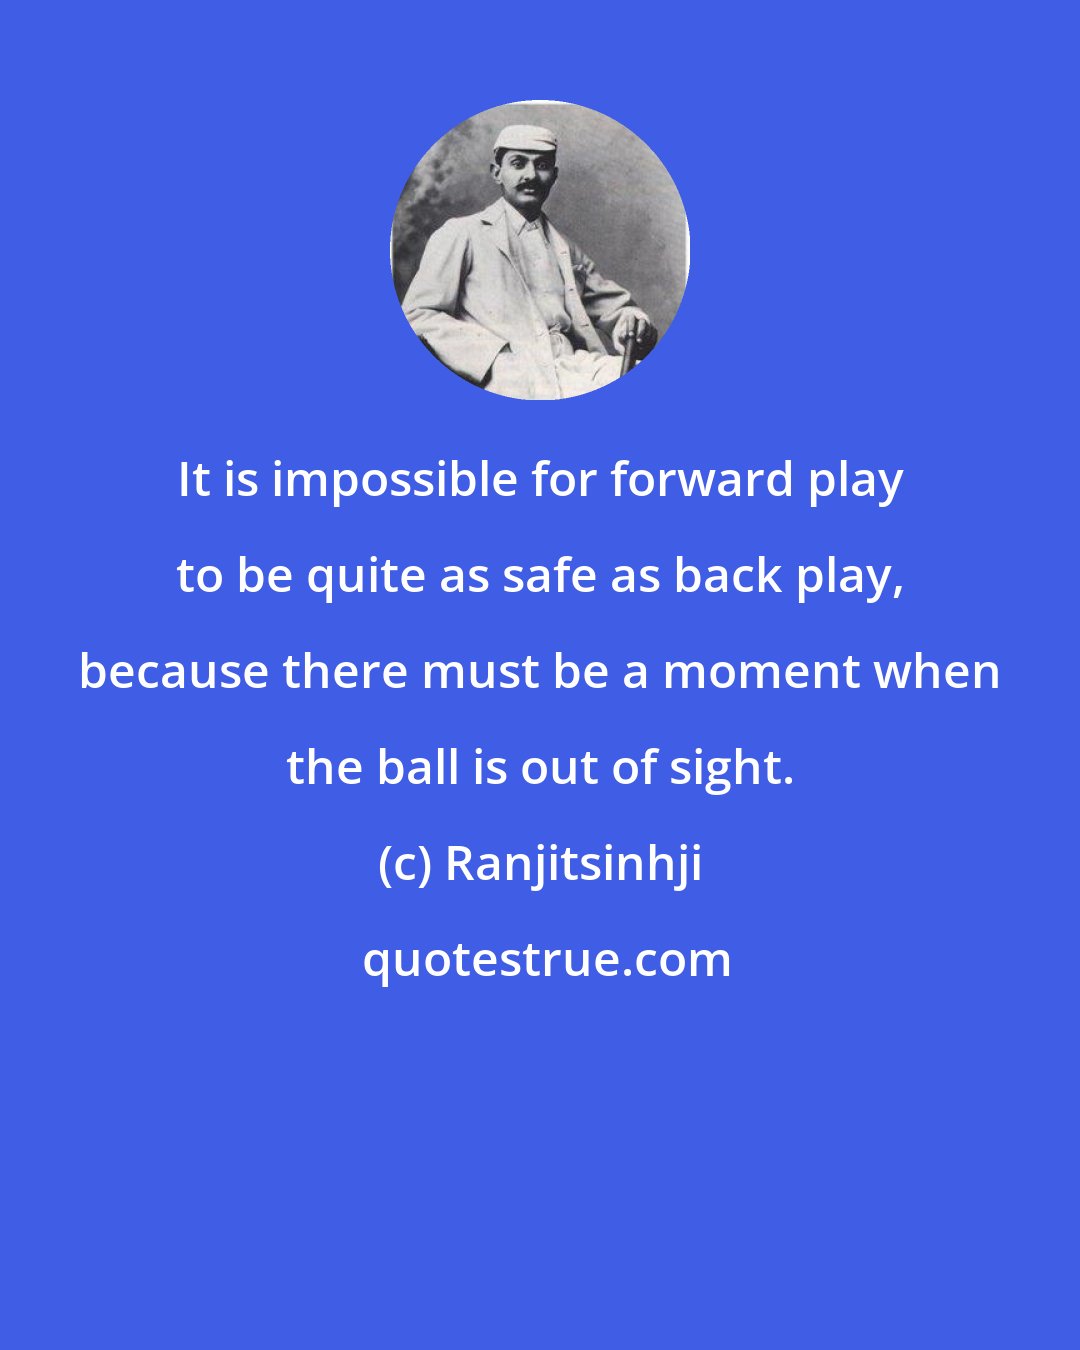 Ranjitsinhji: It is impossible for forward play to be quite as safe as back play, because there must be a moment when the ball is out of sight.